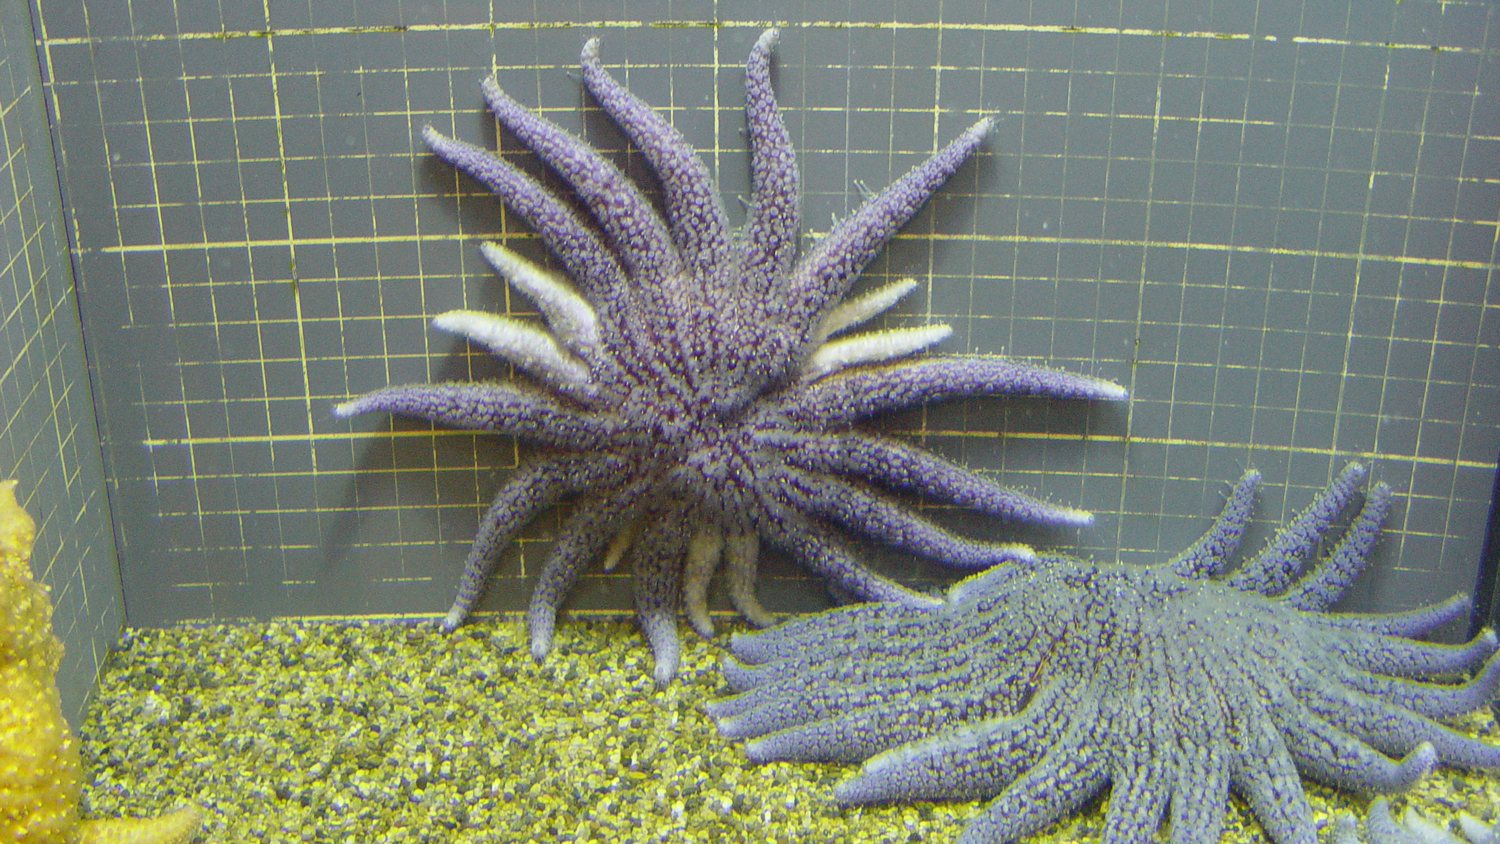 Photograph of a sea star regenerating at least seven arms